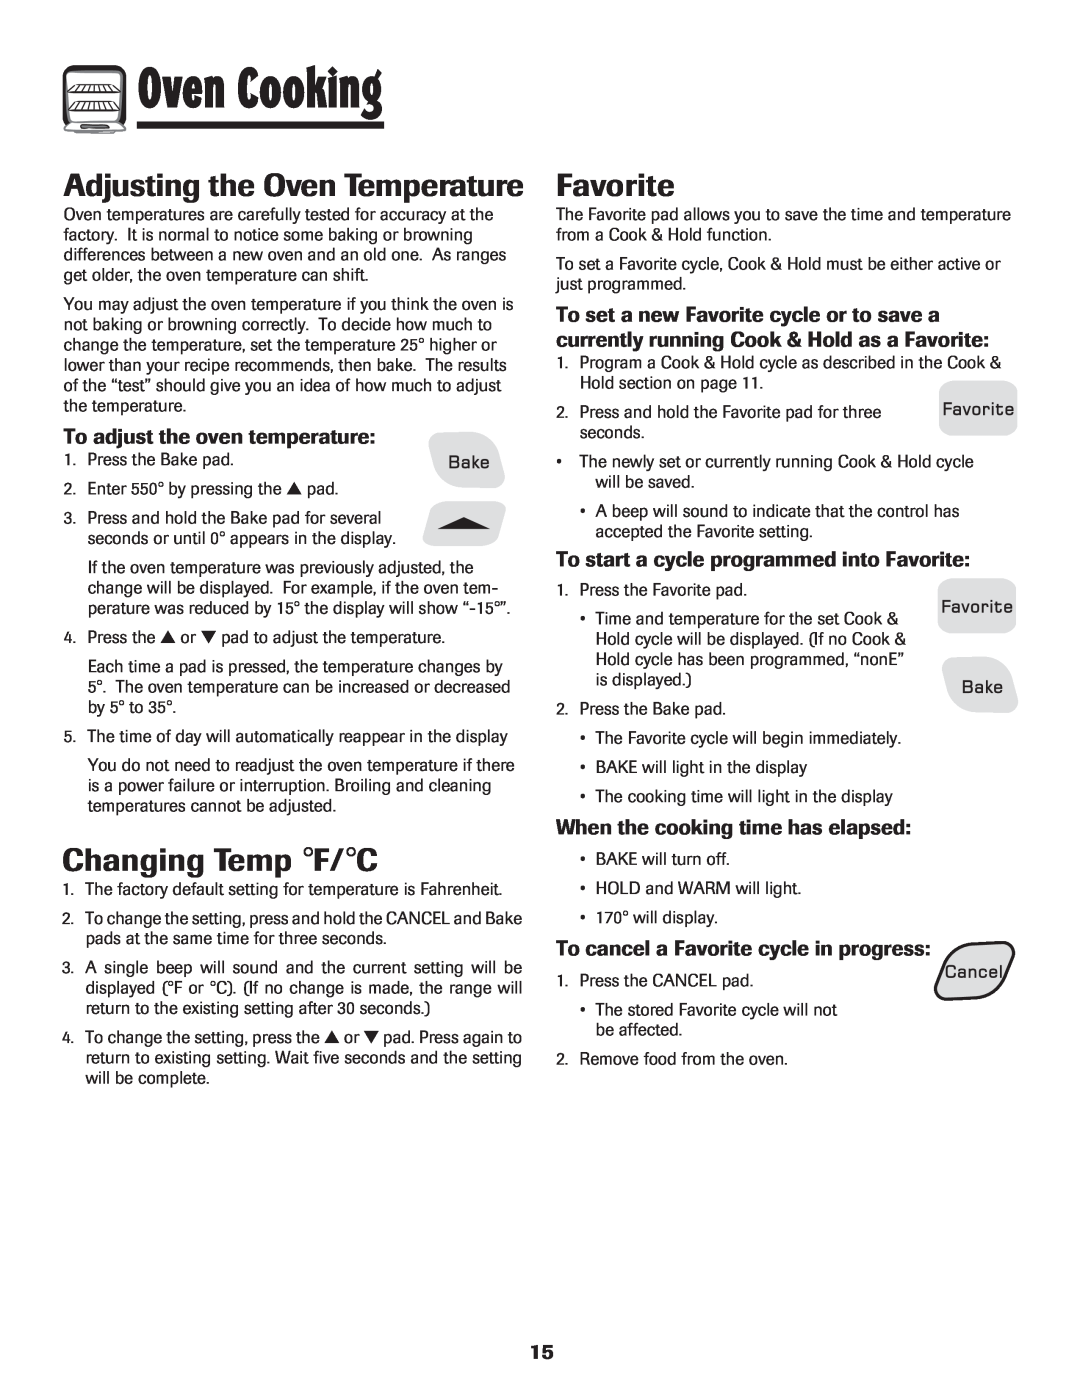 Amana 8113P454-60 warranty Adjusting the Oven Temperature, Changing Temp F/C, Favorite, To adjust the oven temperature 